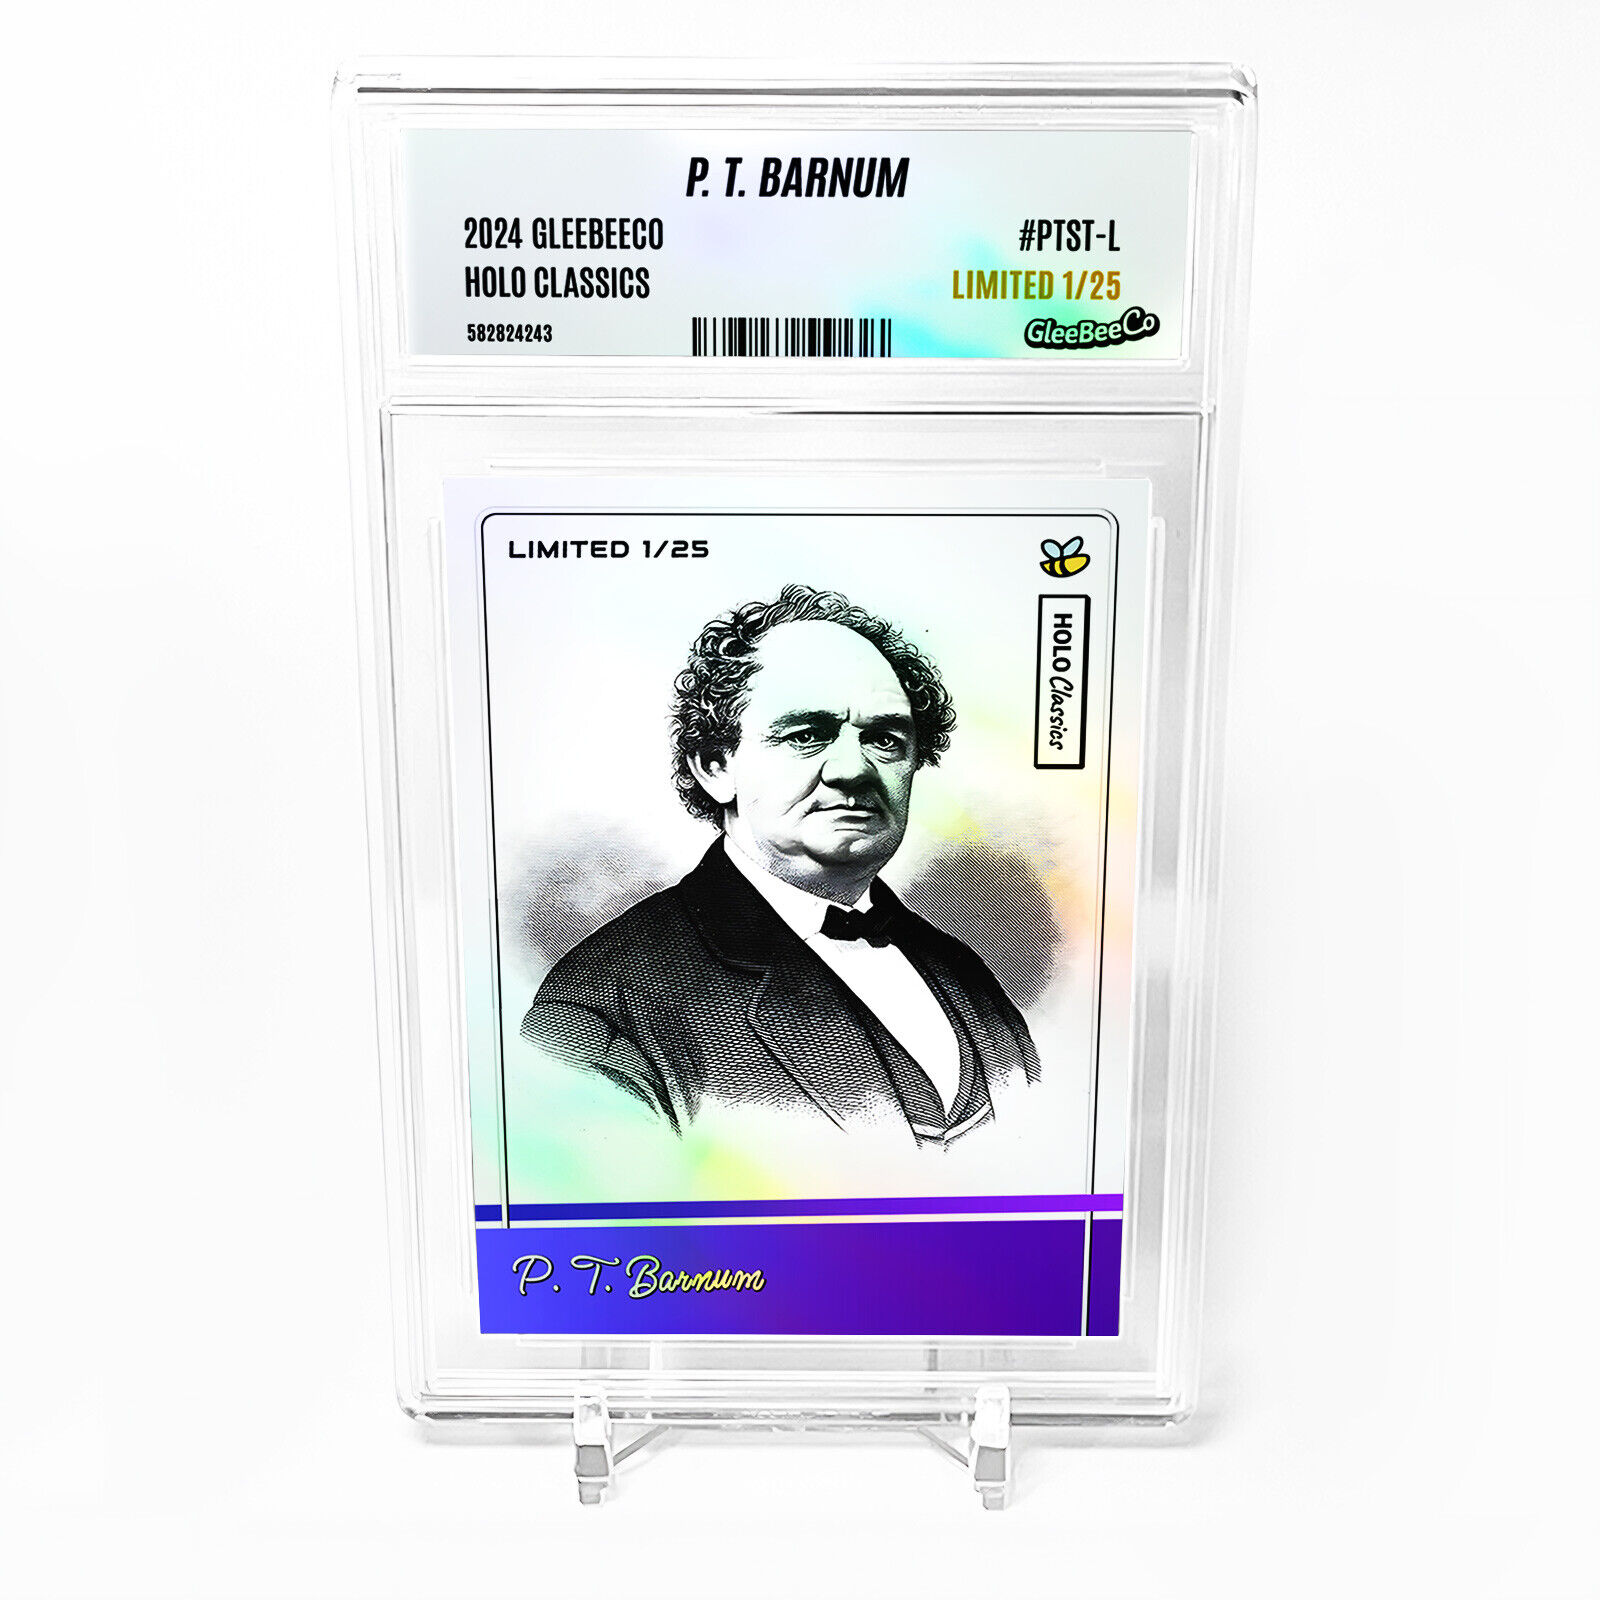 P. T. BARNUM Card 2024 GleeBeeCo Holo Classics Slabbed #PTST-L Only /25